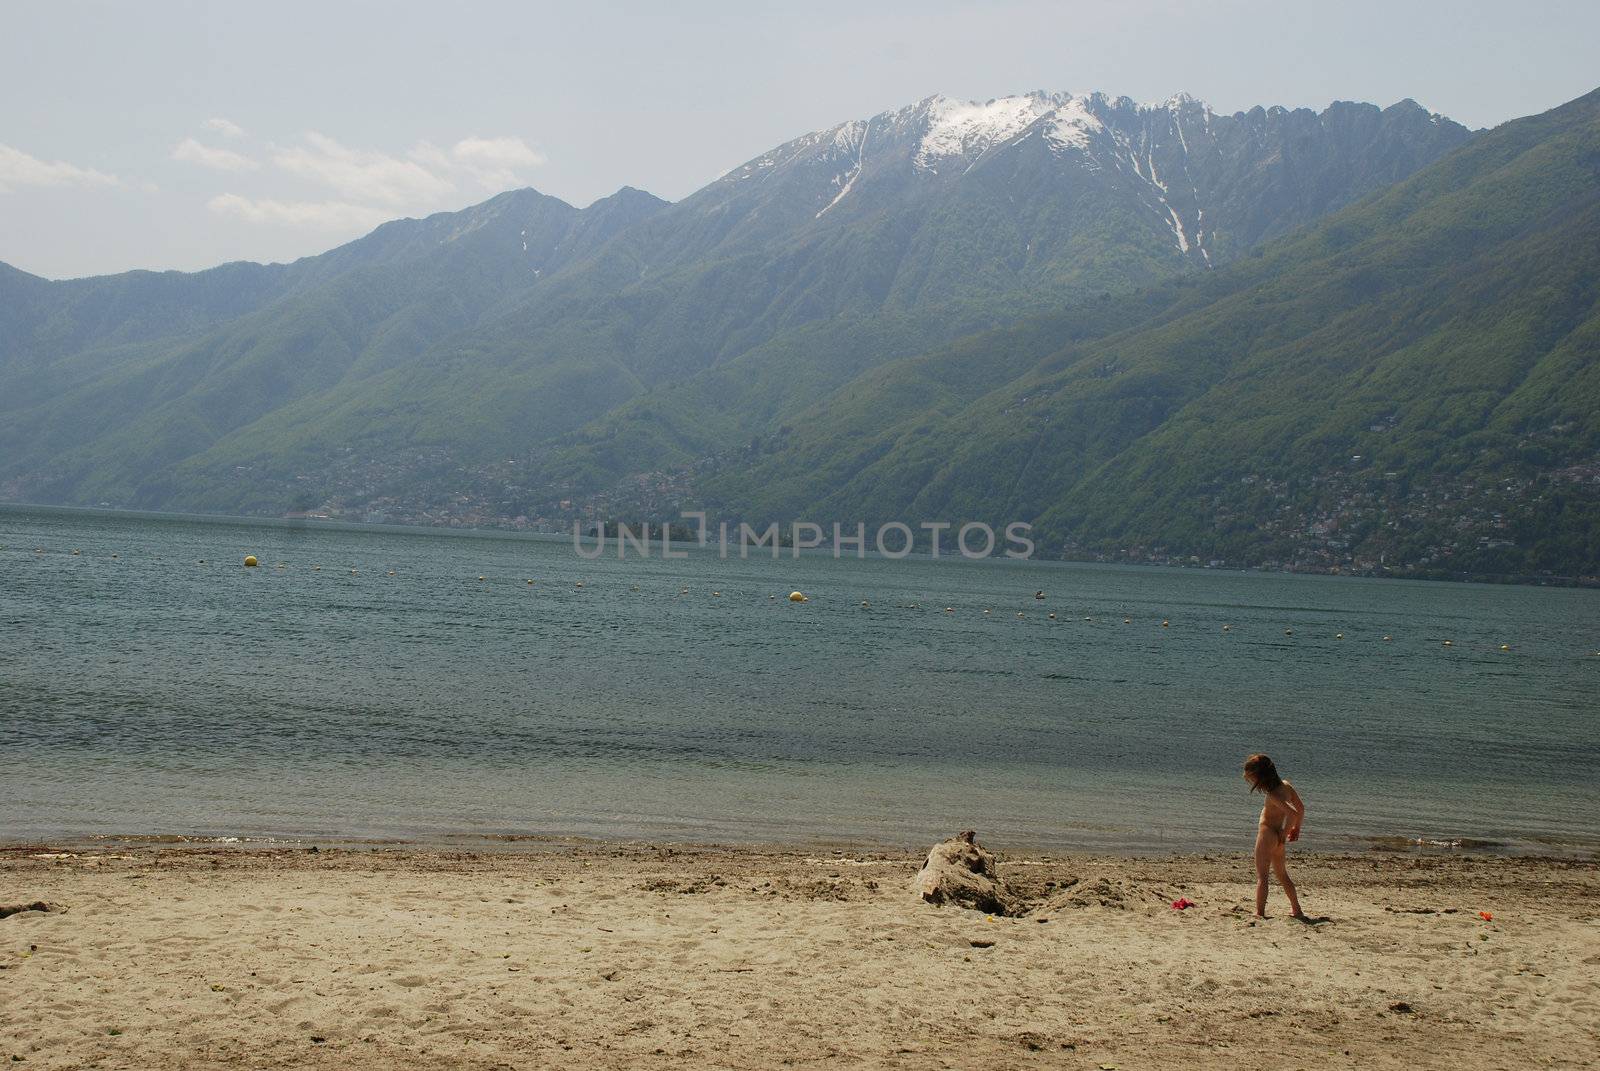 There is a Ascona beach in Lake Maggiore in the middle of May, there is a child playing in the beach, there is a beutiful view in the lake, porto Ronco and  Brissago situated in the border of the Lake, beutiful Leone hill still covered with snow and the cloudy sky